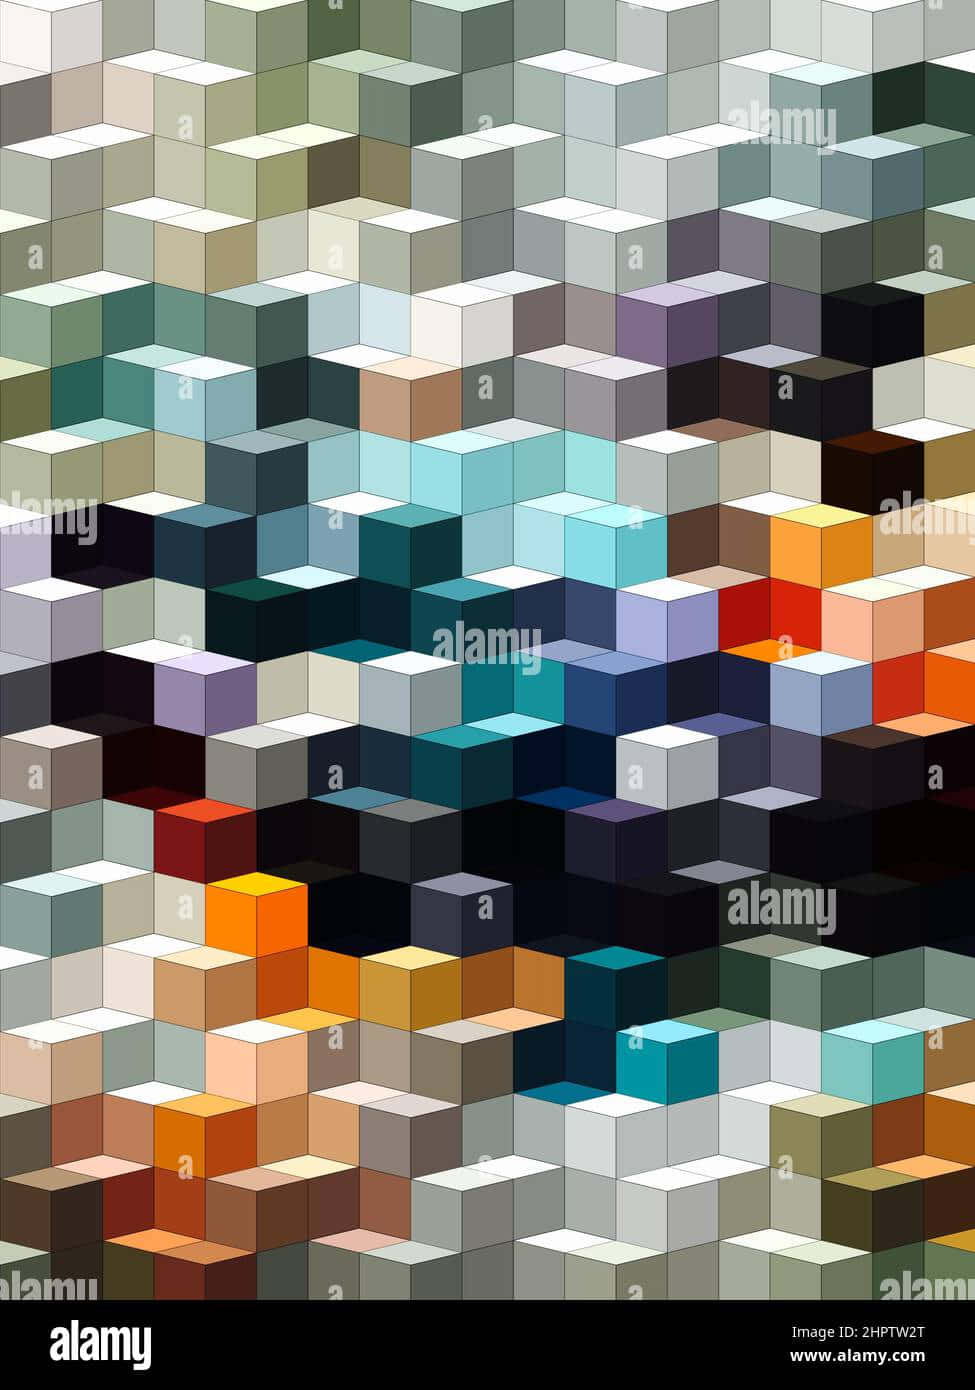 Abstract Geometric Cubes Background - Stock Image Wallpaper